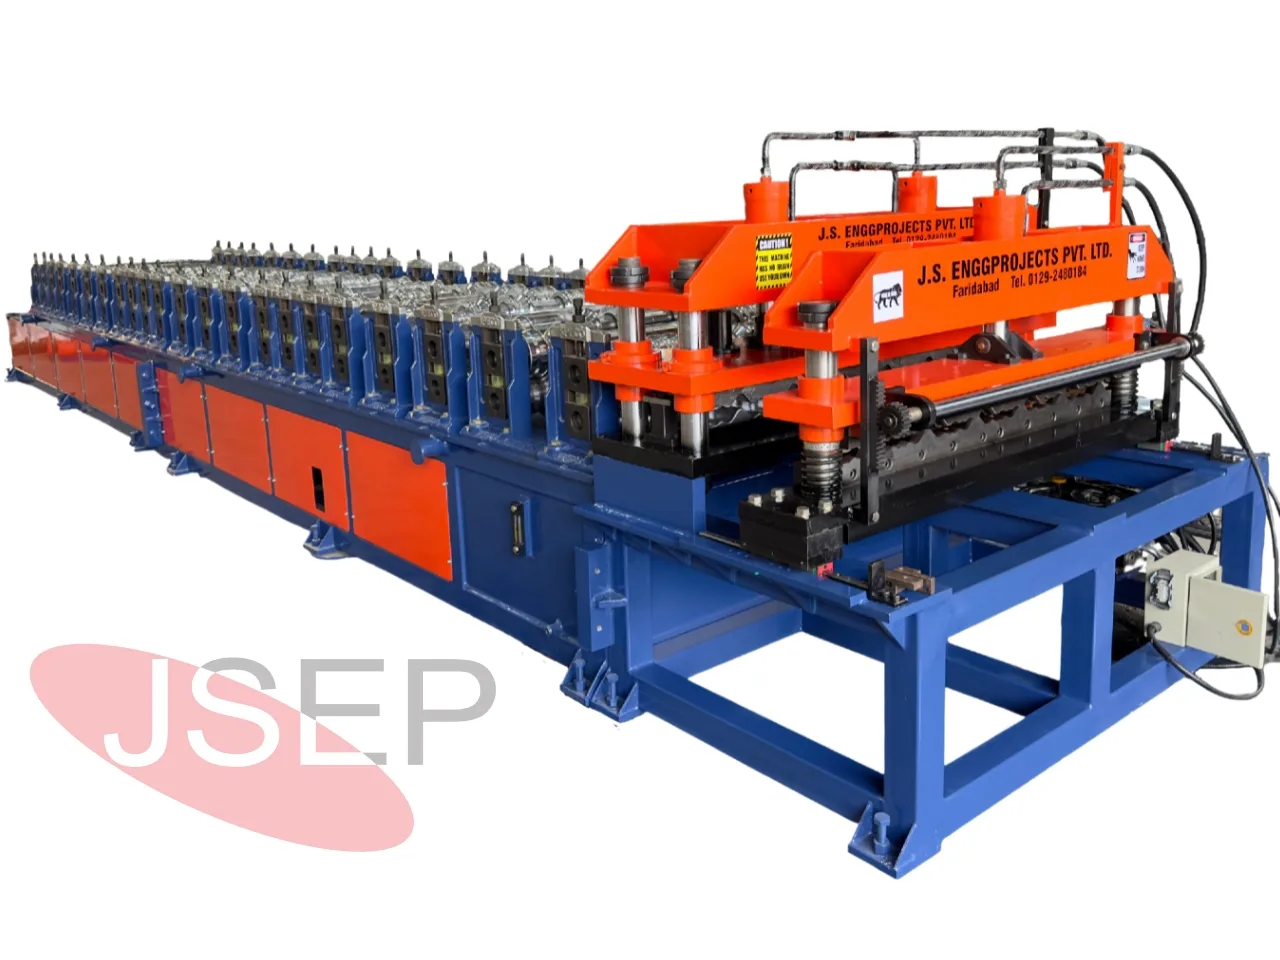 Tile Profile Roll Forming machine Manufacturer in Faridabad, Haryana, India